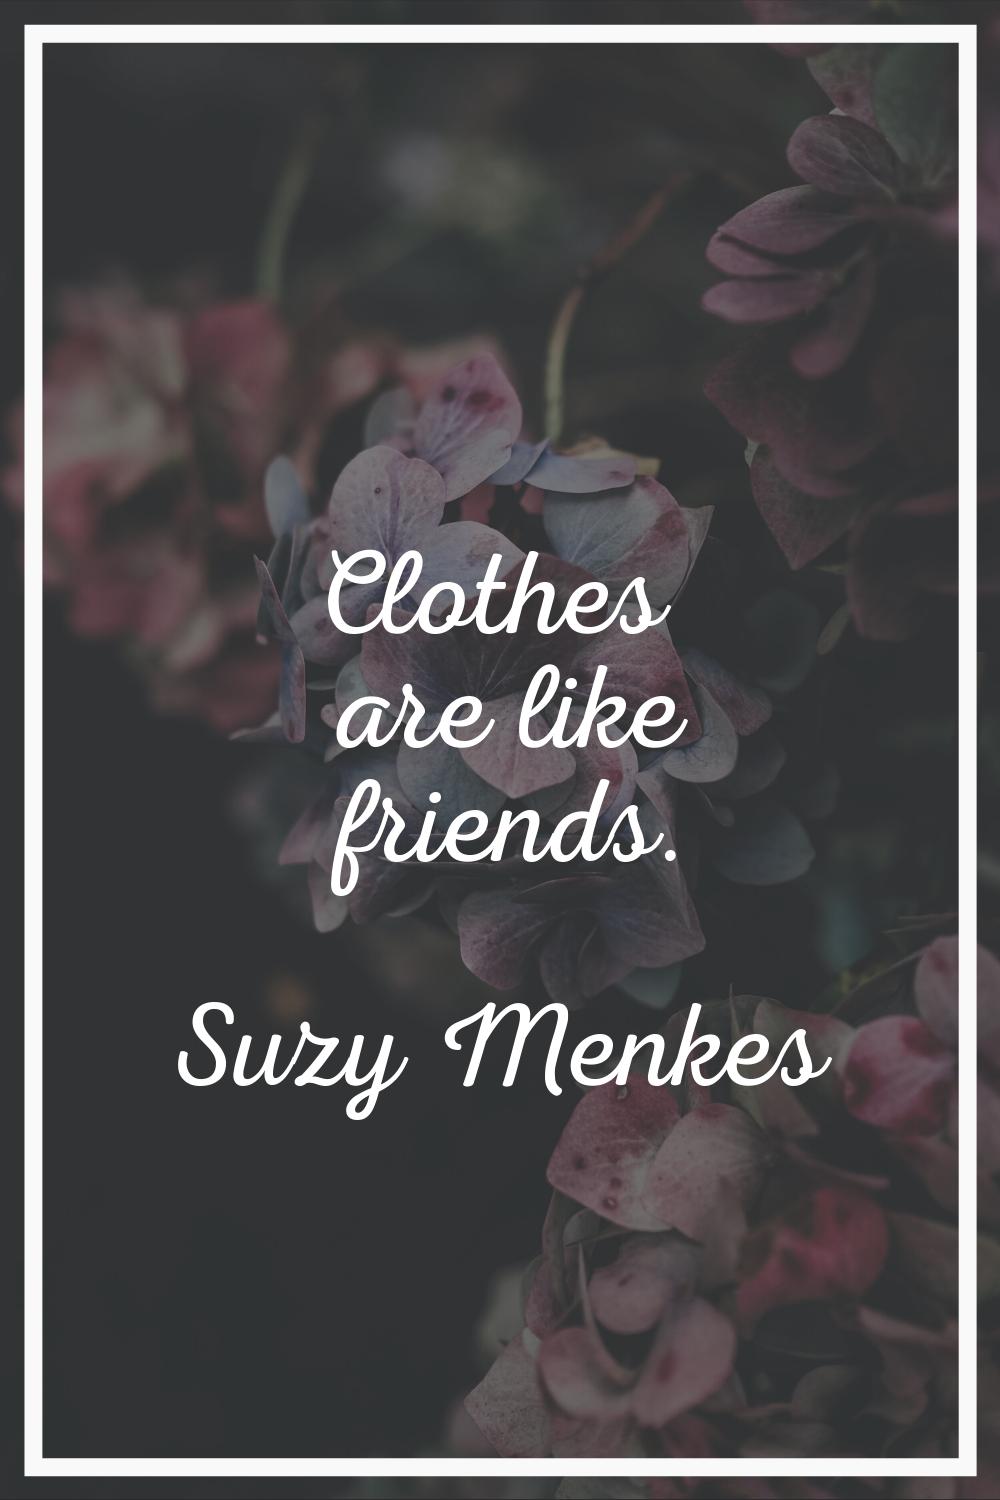 Clothes are like friends.